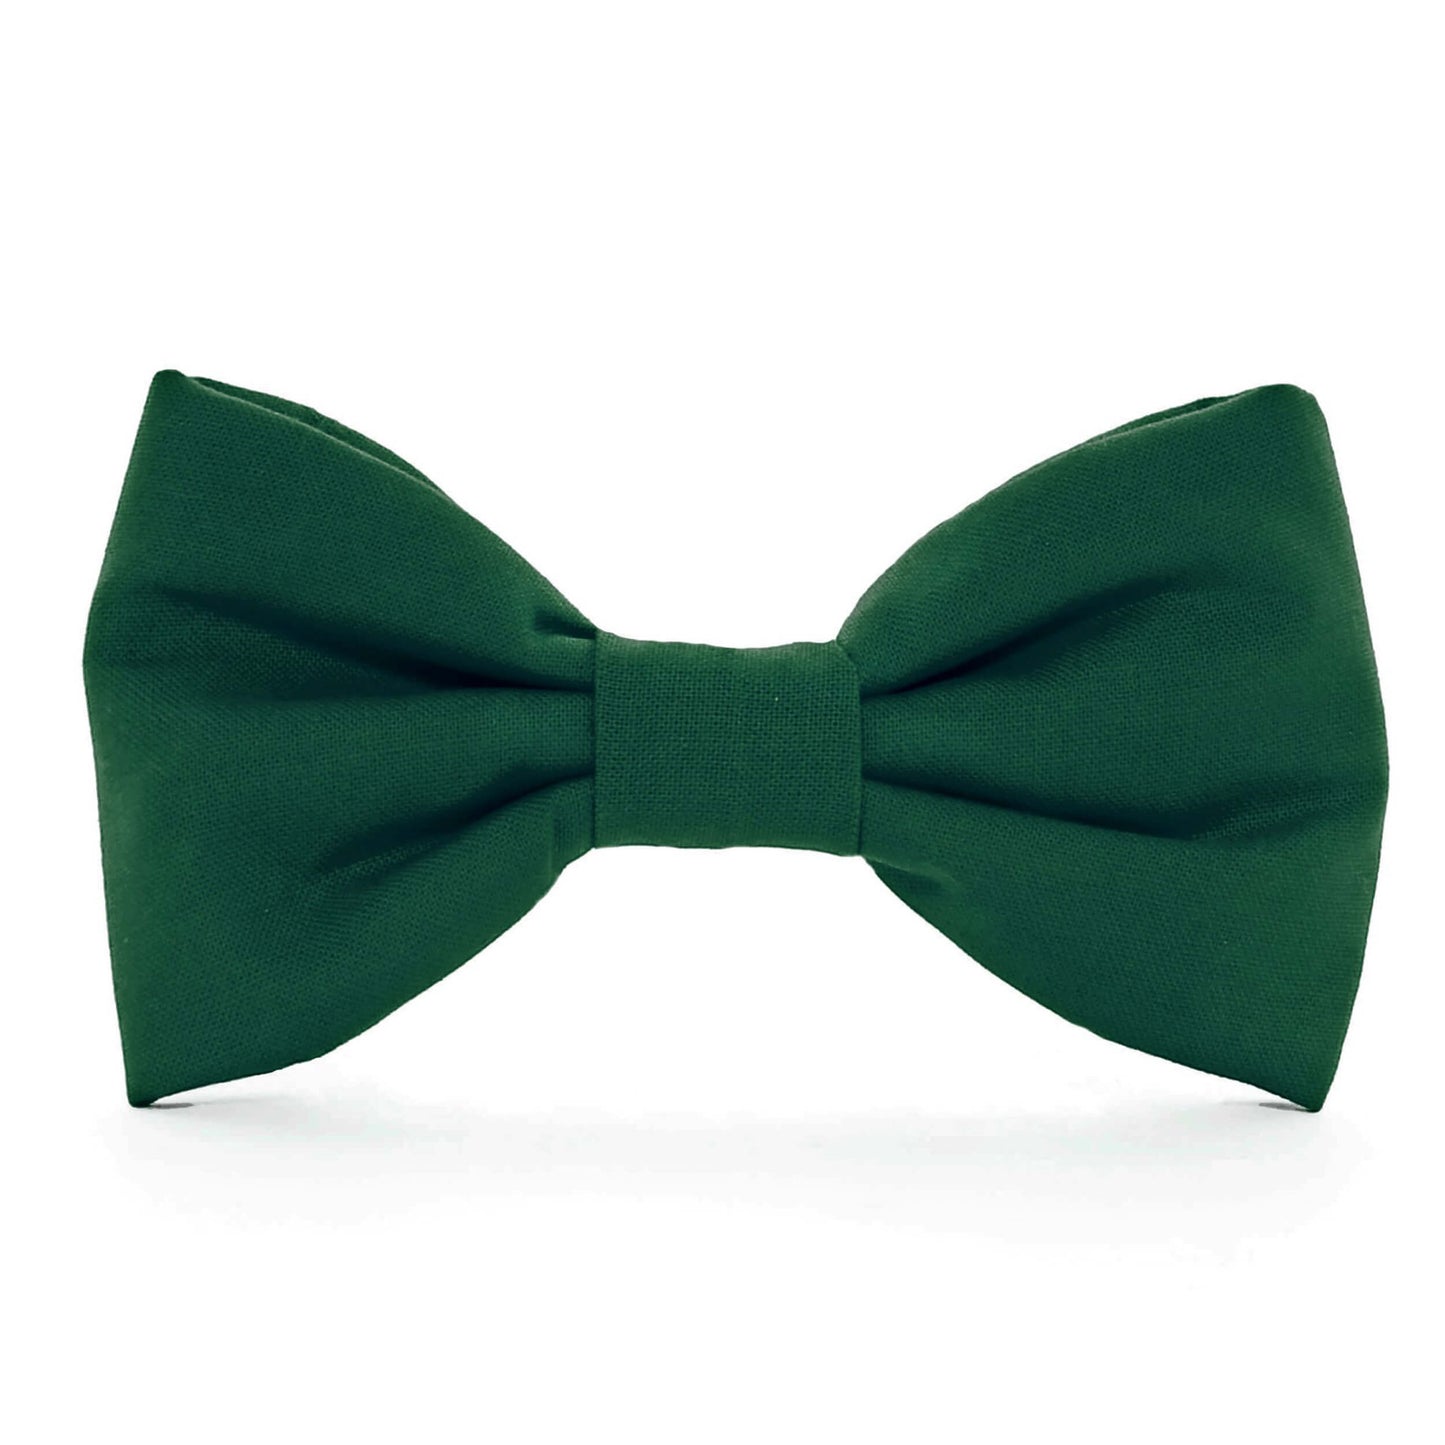 Evergreen Dog Bow Tie from The Foggy Dog